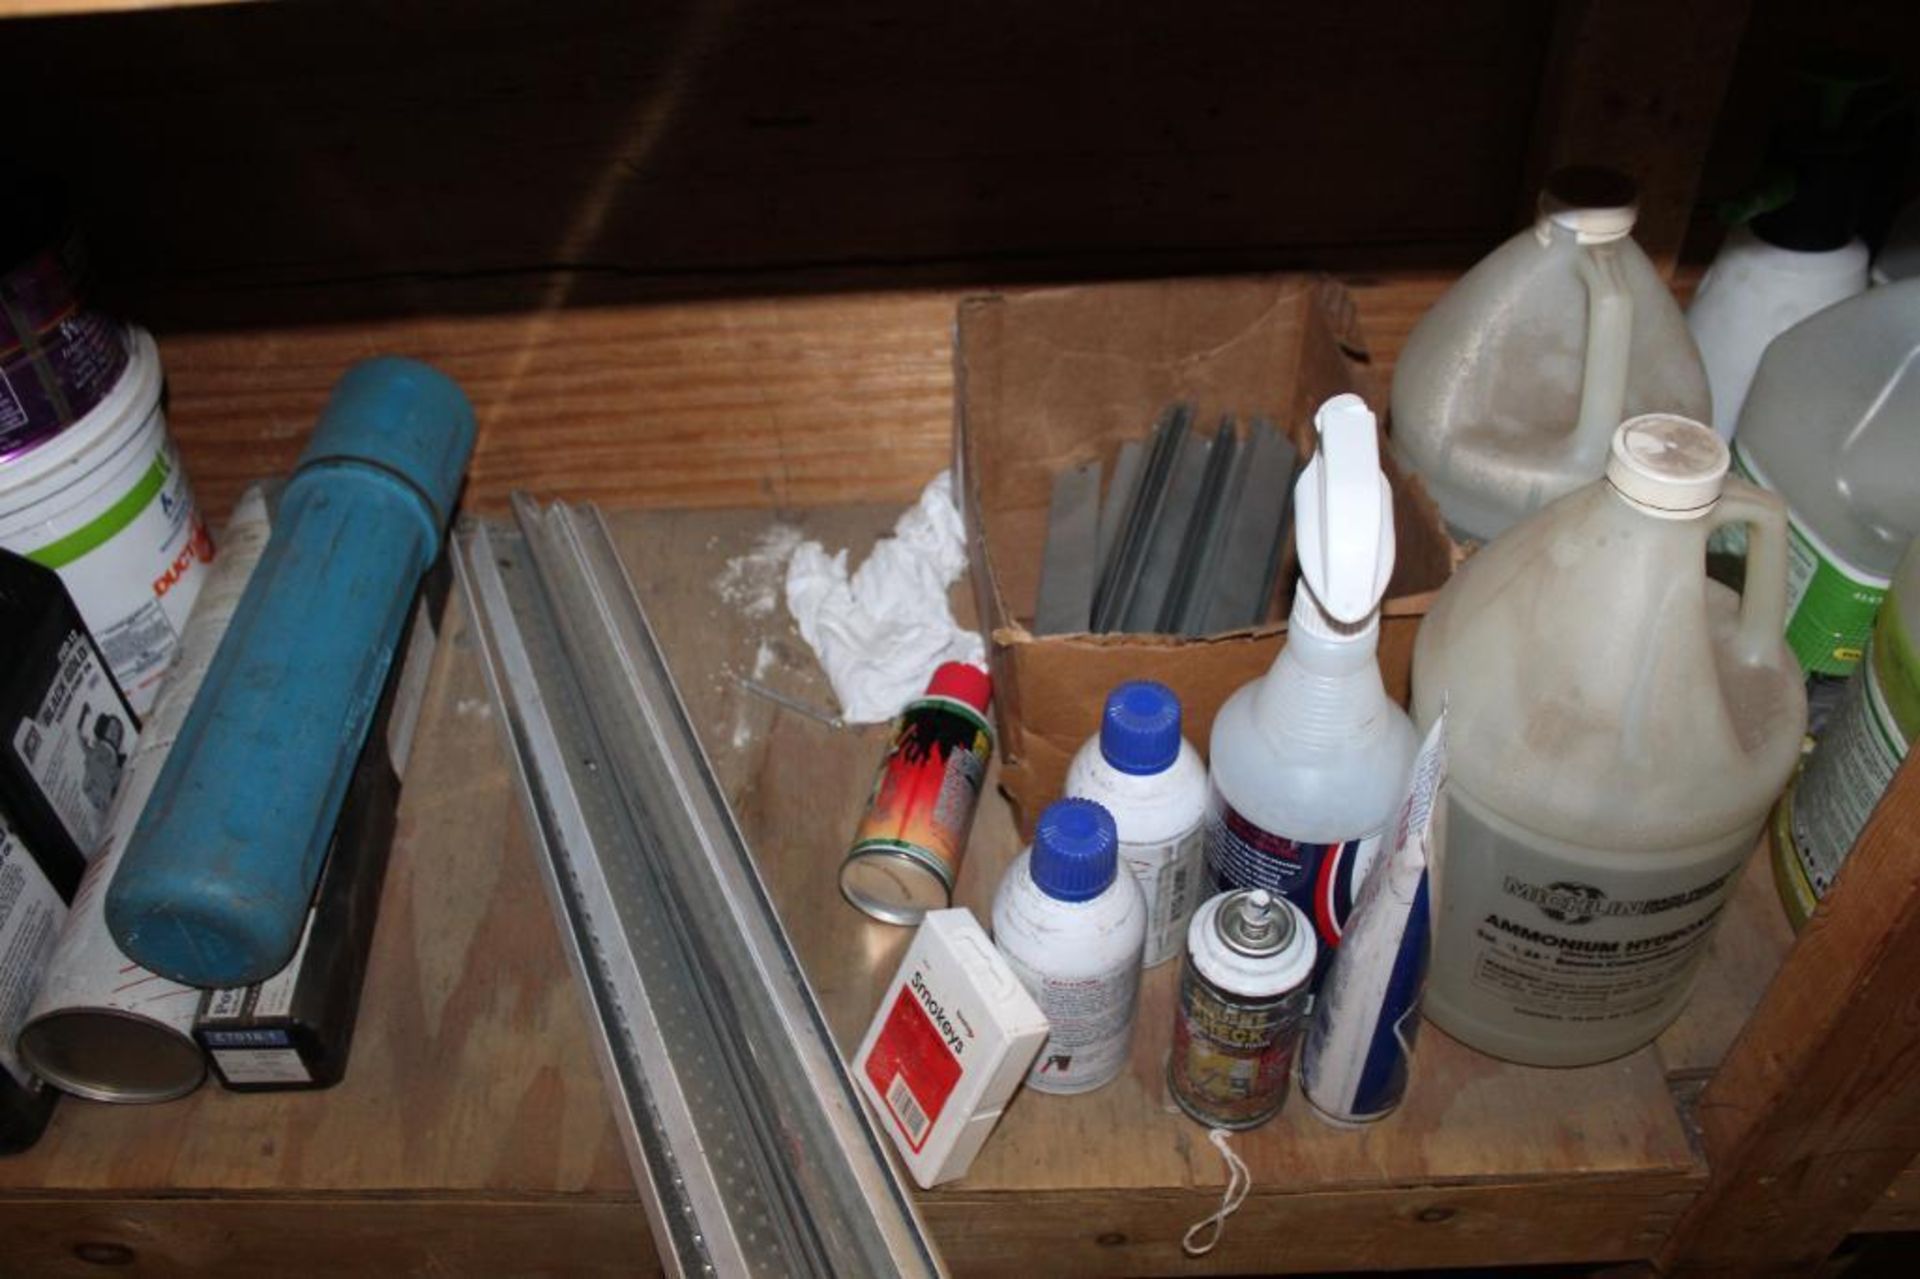 Lot of Flex Conduit, Air Filters and Hvac Hardware - Image 19 of 23